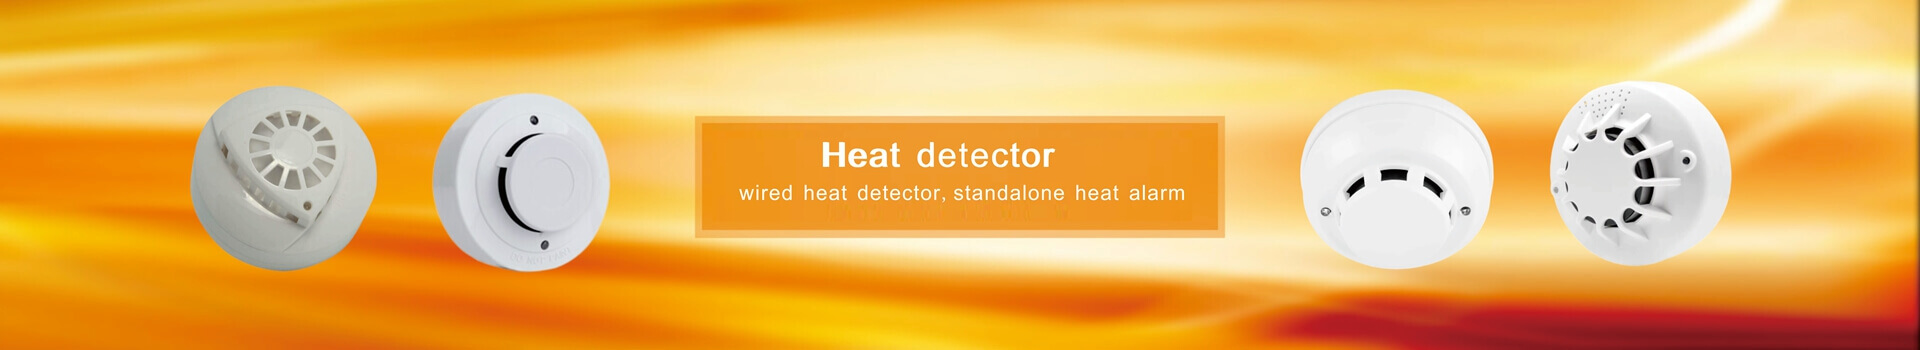 Wired heat detector